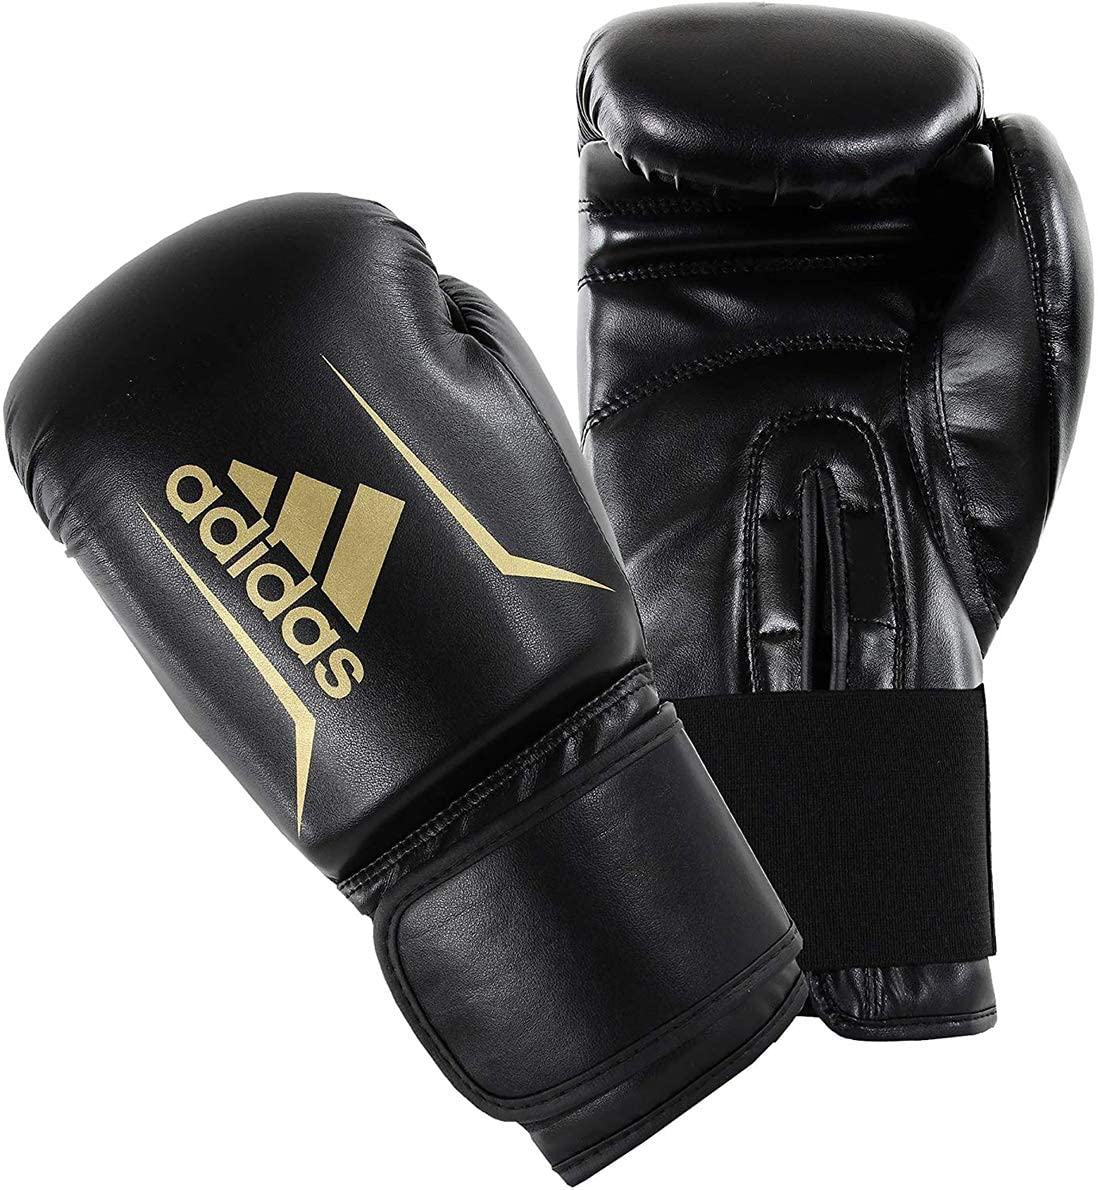 Adidas Boxing 3.0 FightersShop & Kickboxing Gloves 50 — for Speed Men/Wome Boxing FLX